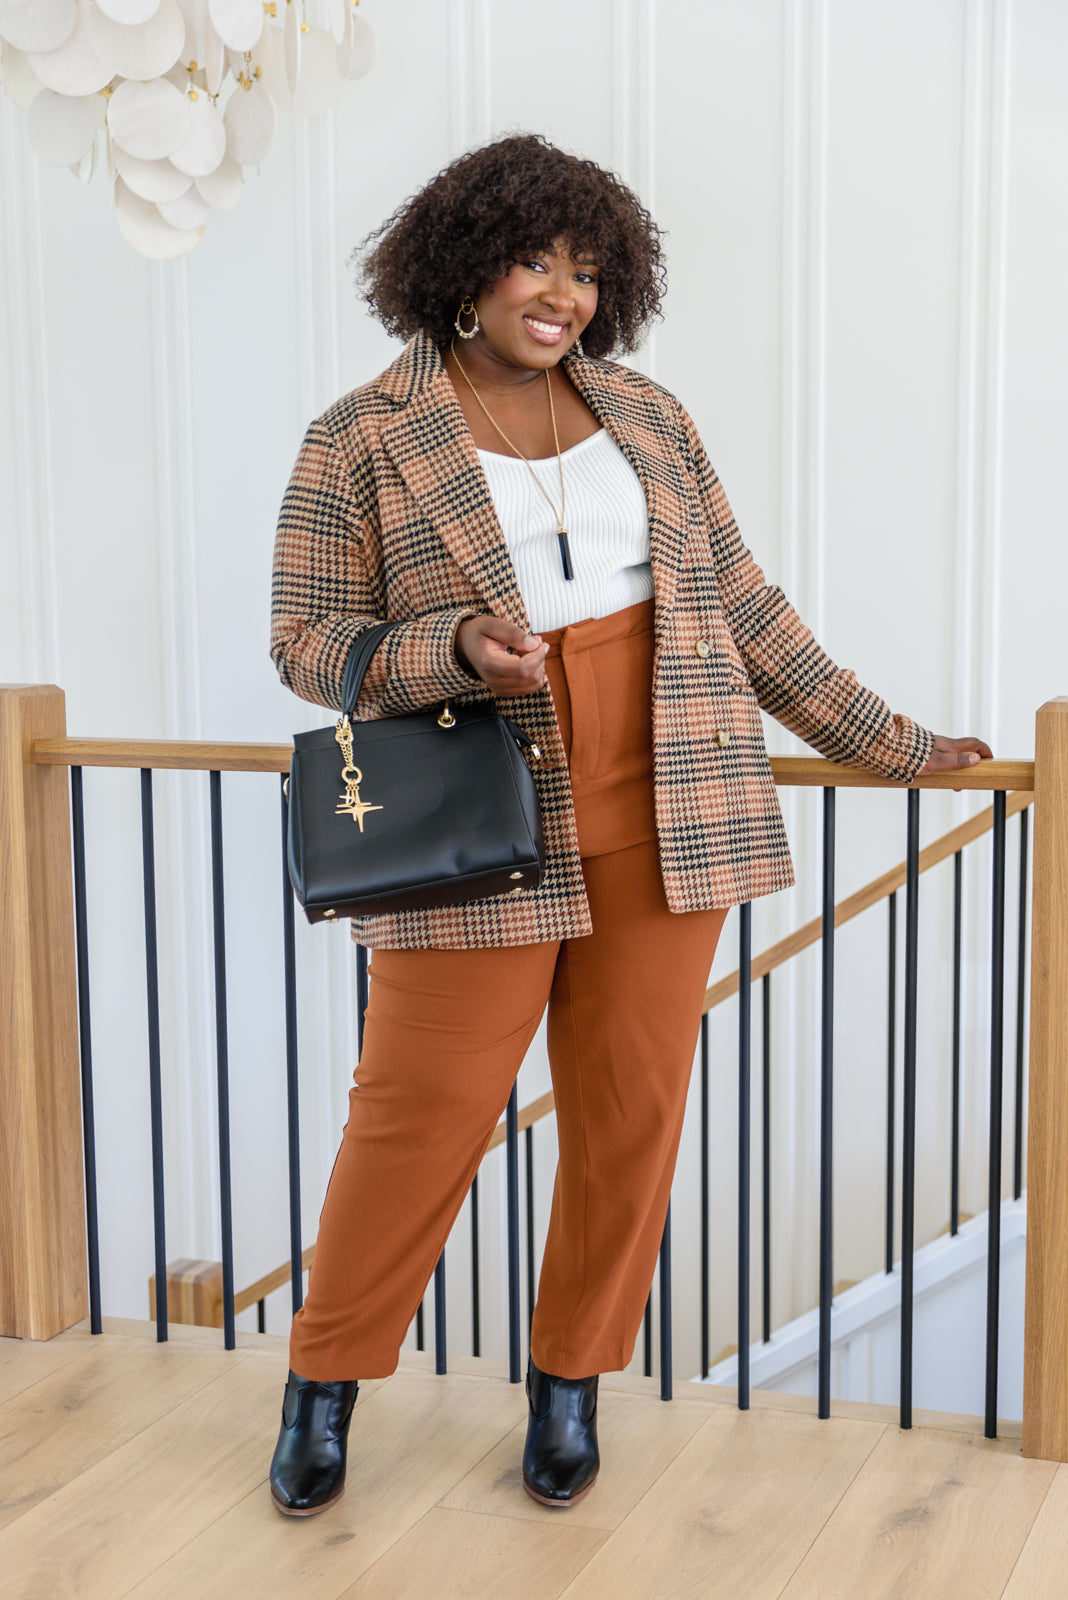 How to Style Plaid Pants for Work - The Styled Press | Plaid pants outfit,  How to style plaid pants, Plaid fashion